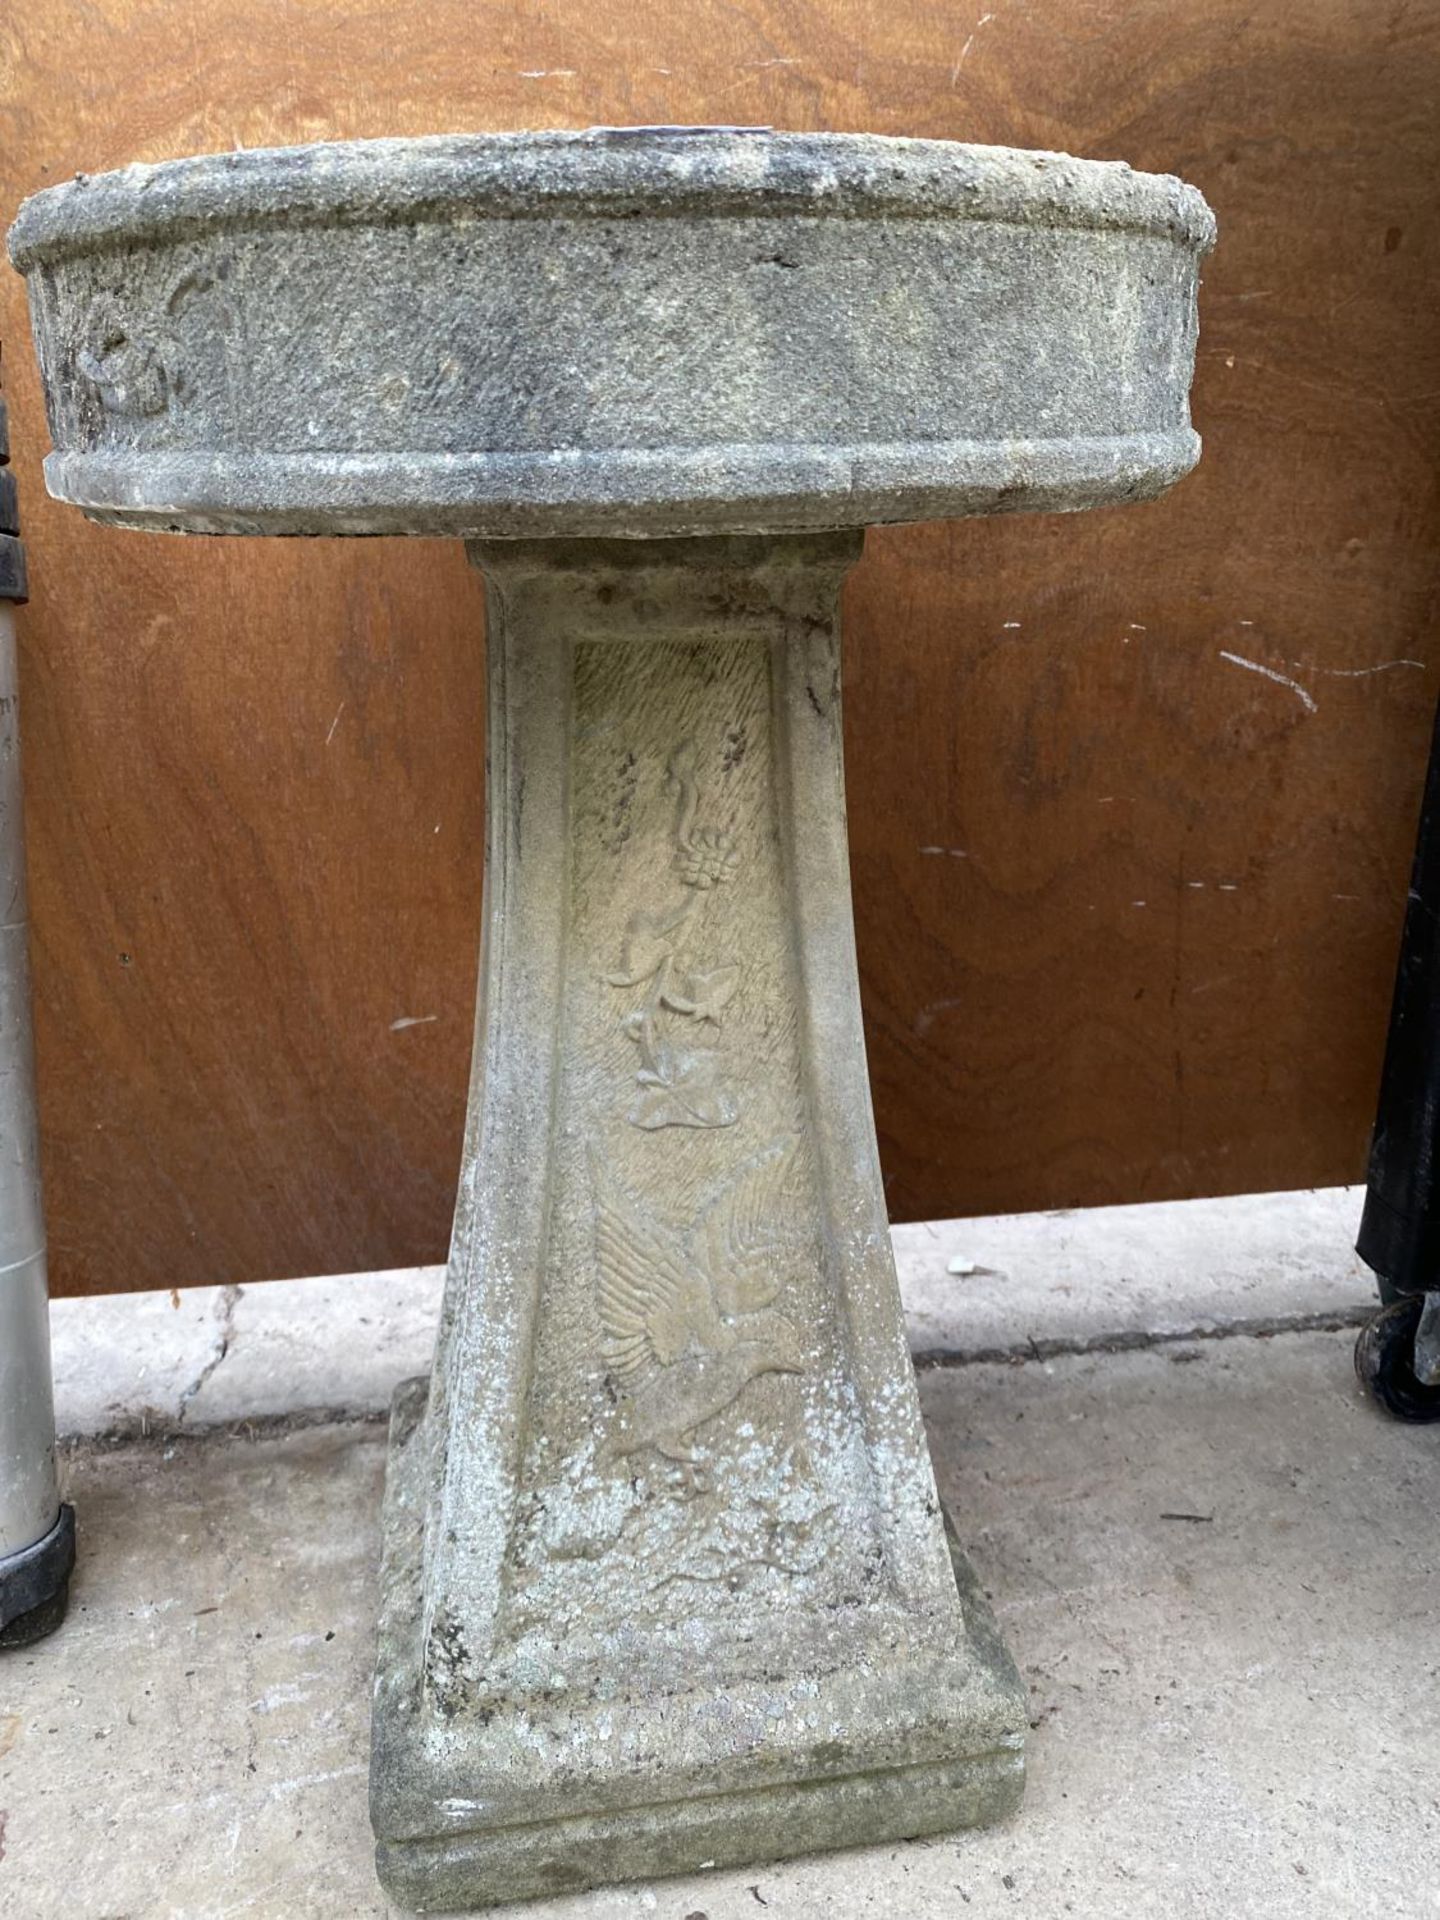 A RECONSTITUTED STONE BIRD BATH WITH PEDESTAL BASE - Image 3 of 4